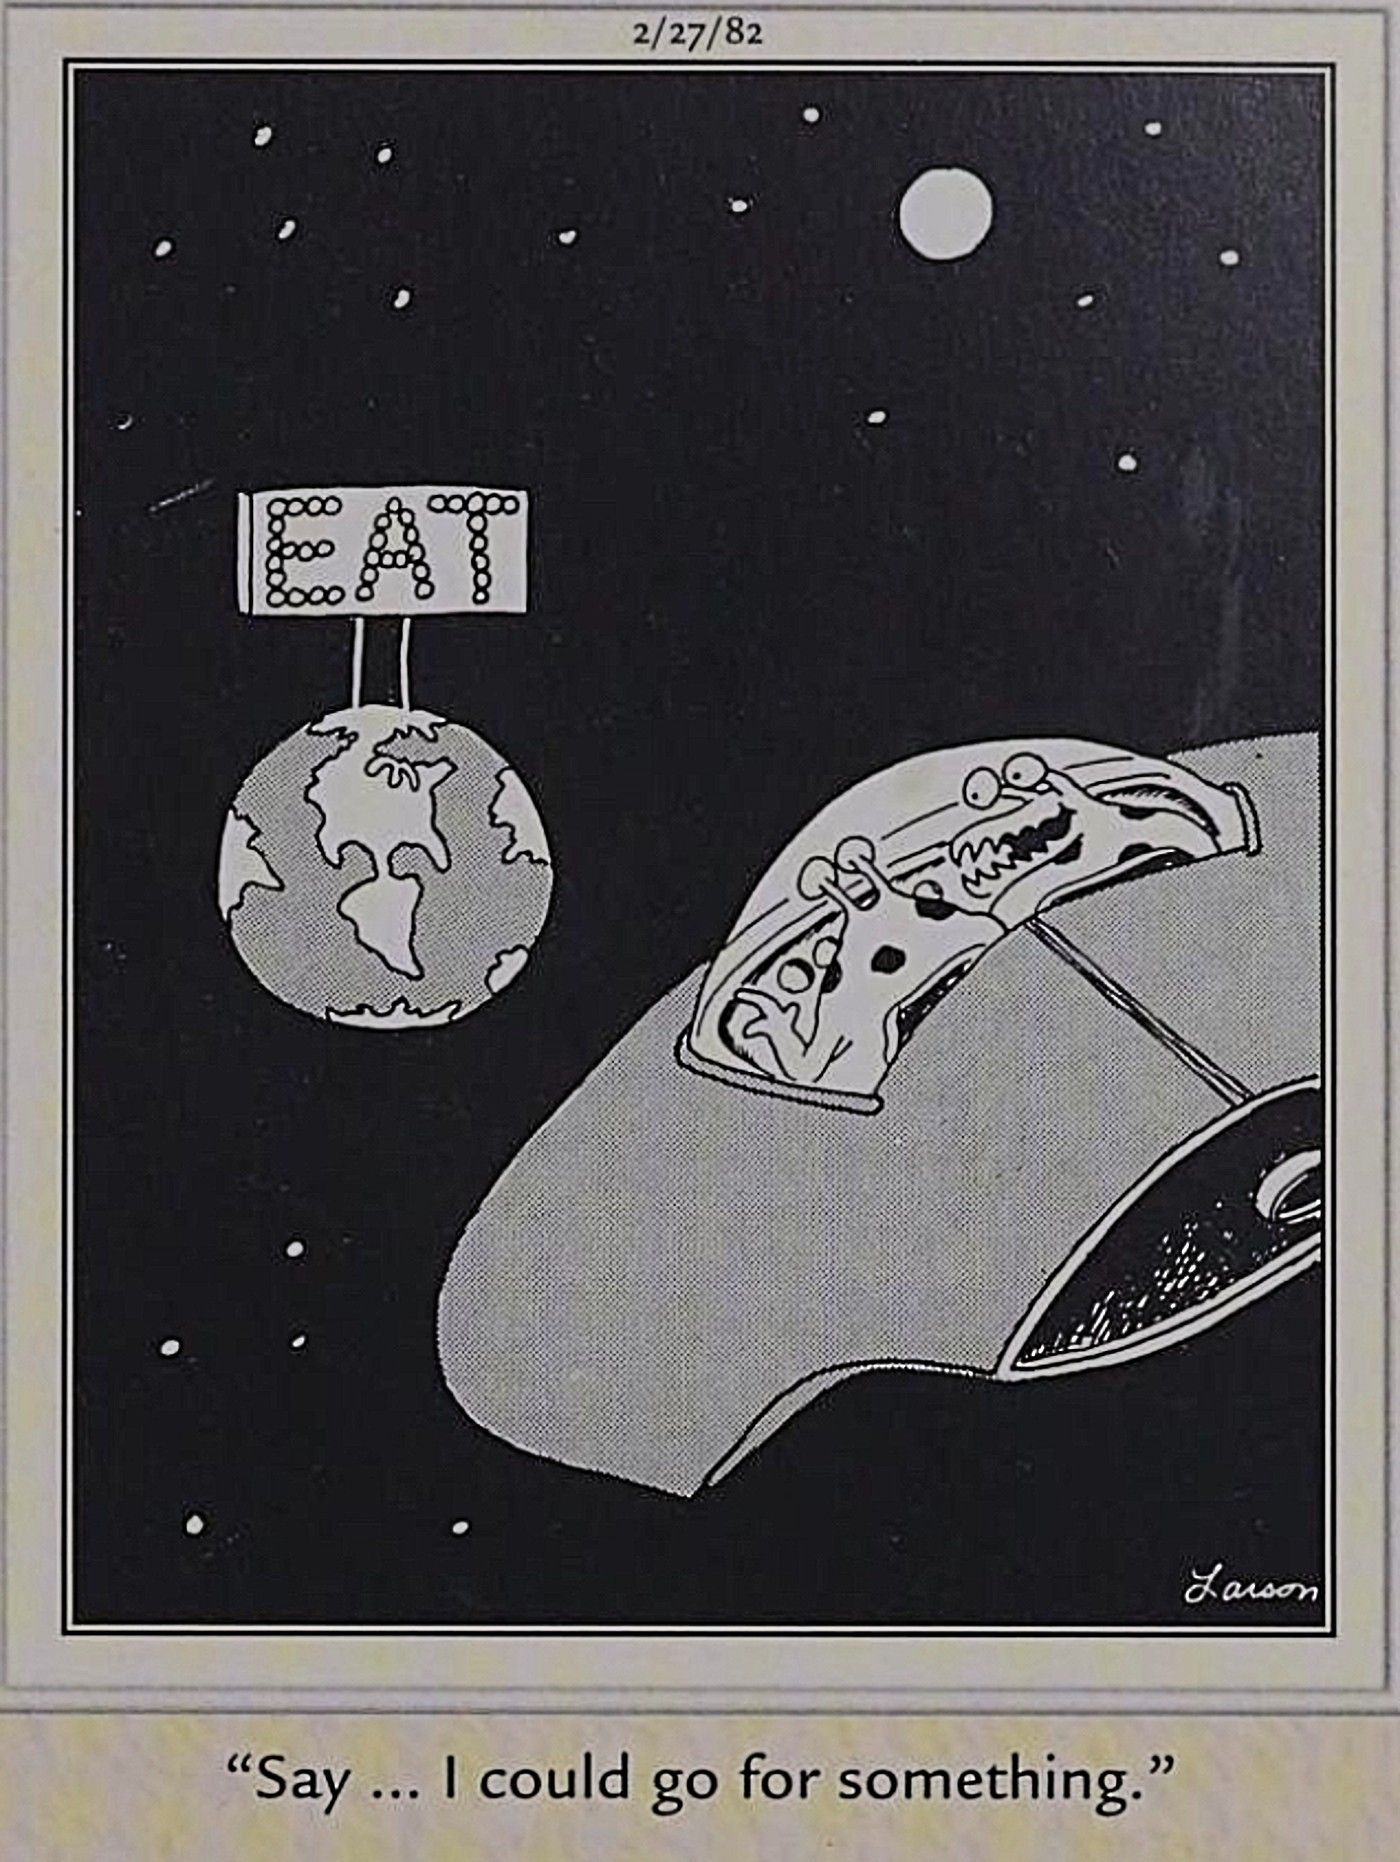 Far Side, Earth is an intergalactic diner